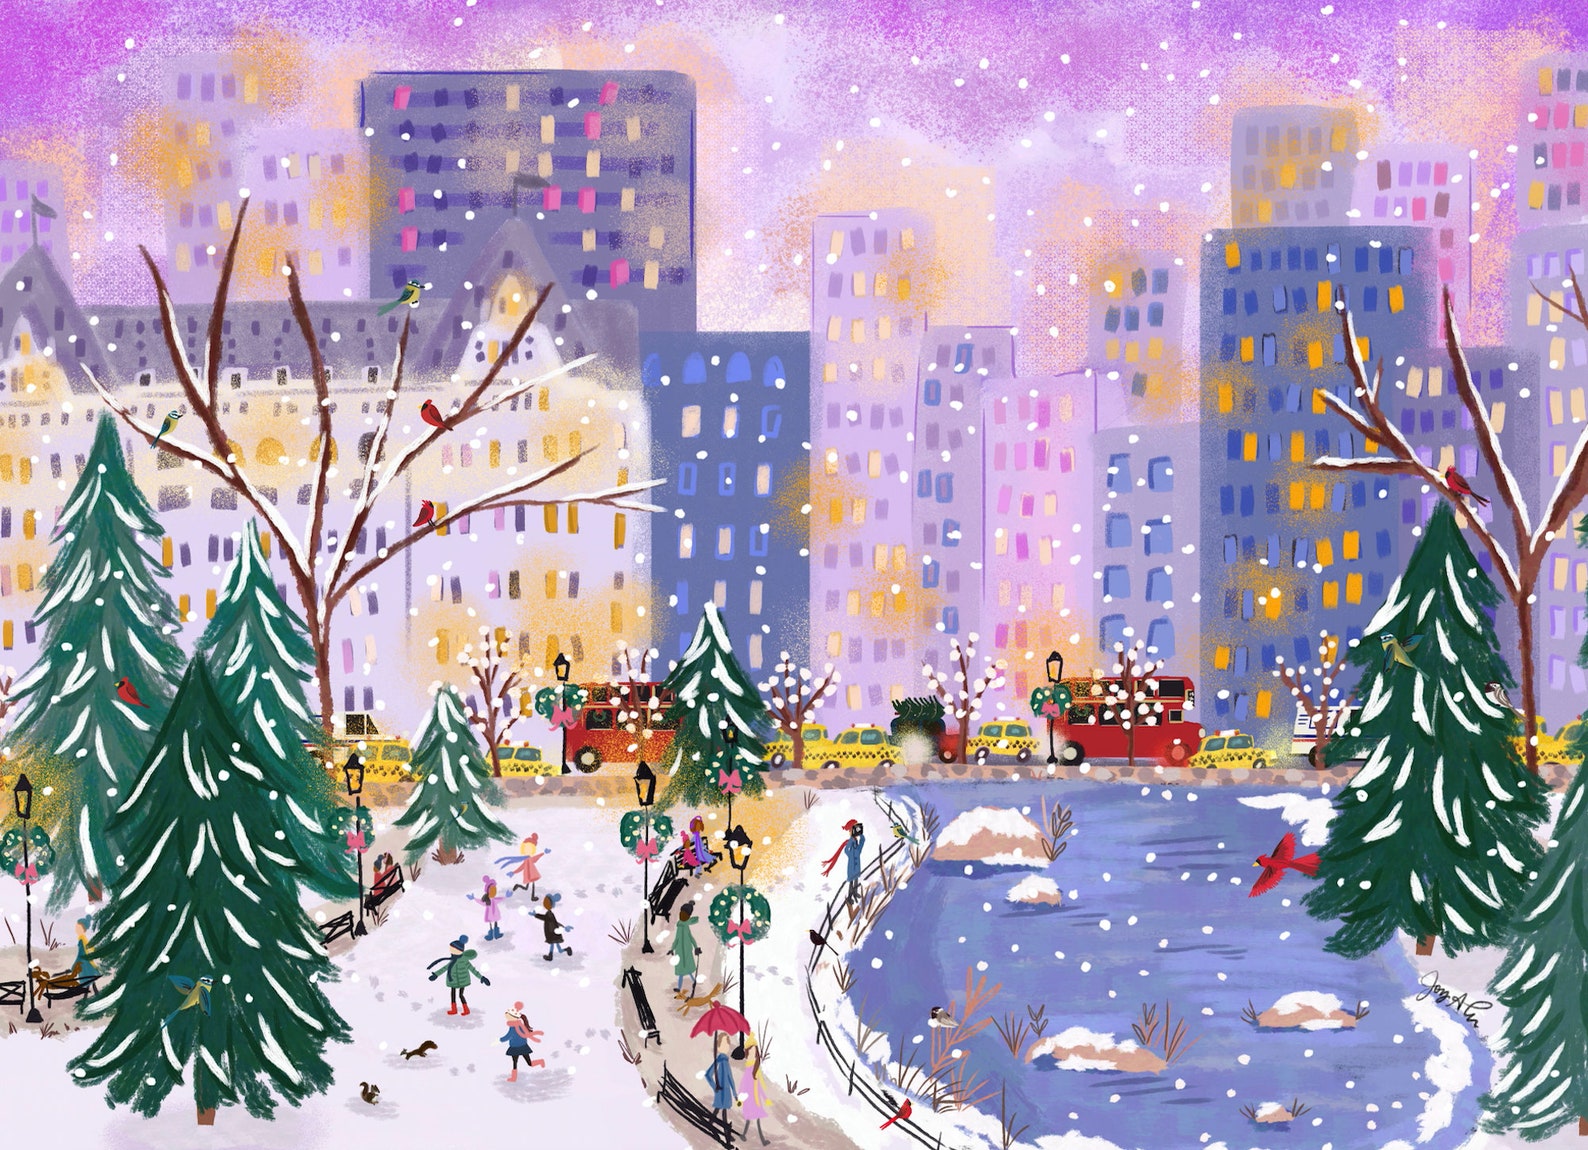 Central park in winter painting